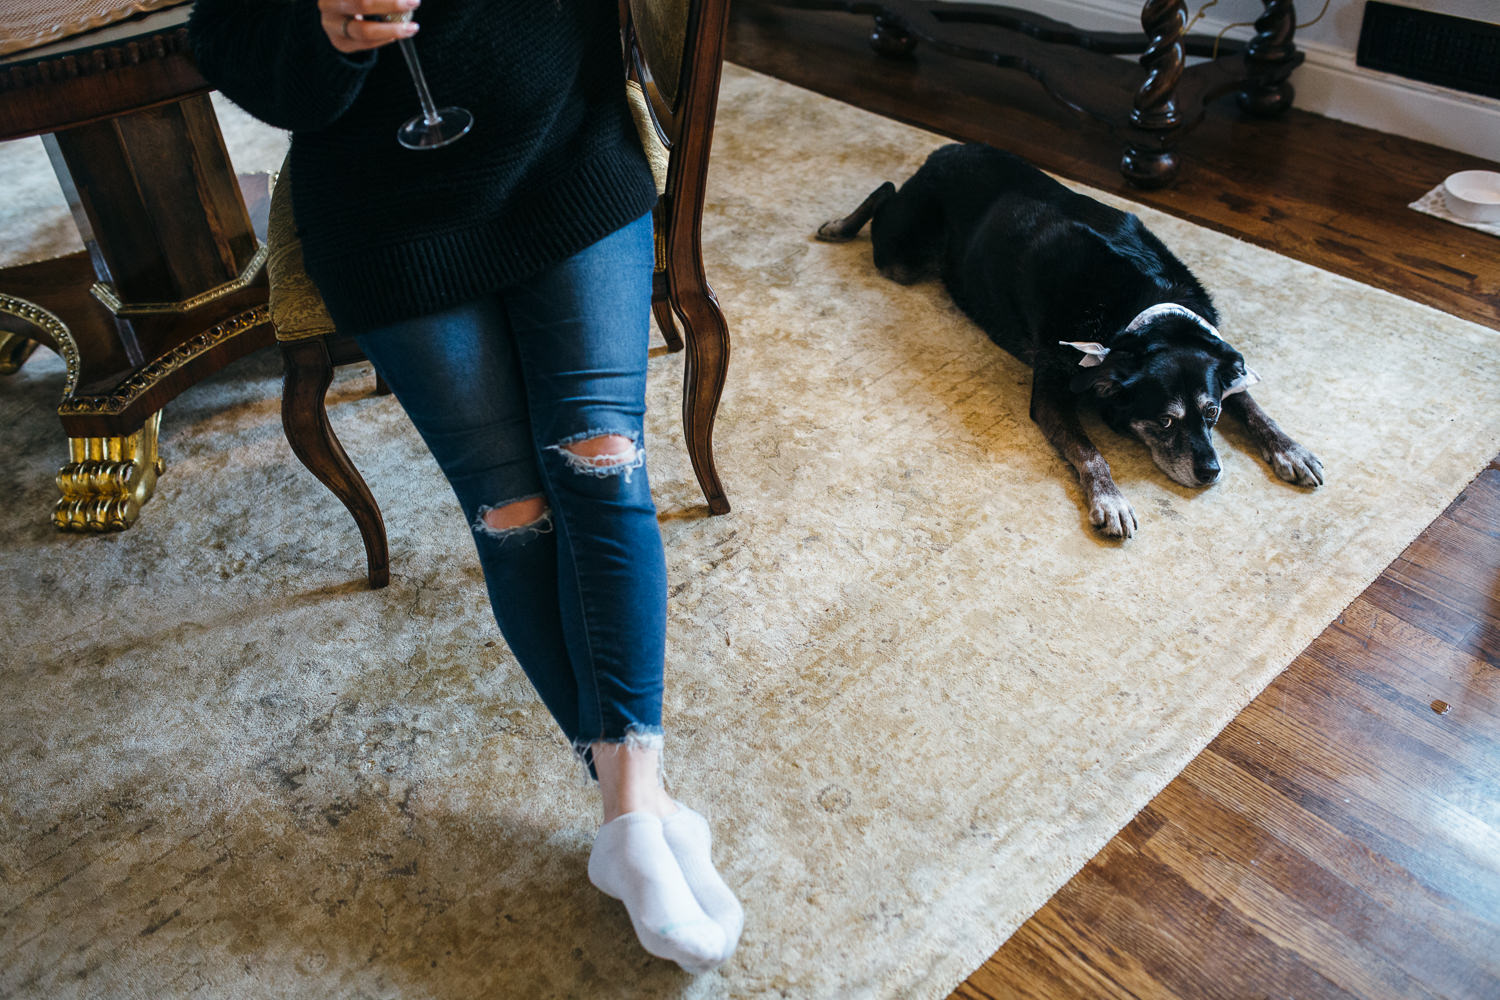 dog laying on a rug while a woman drinks wine